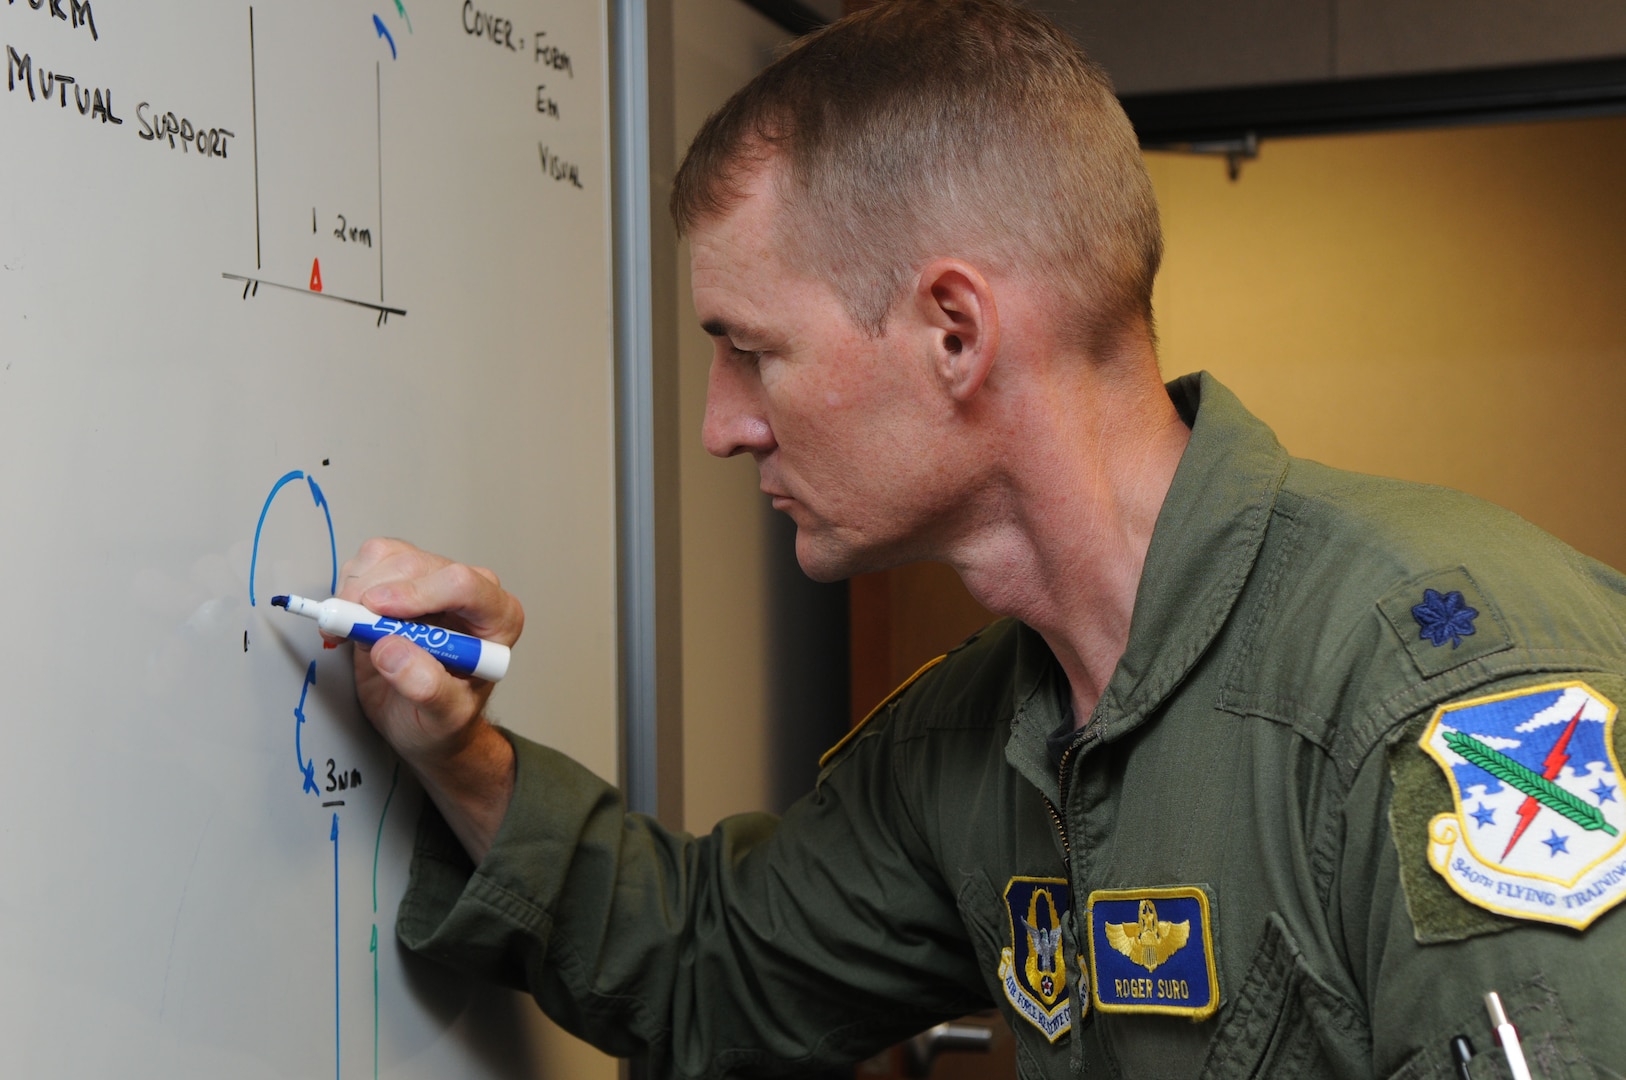 Lt. Col. Roger Suro, a full-time Reserve instructor pilot attached to the 435th Fighter Training Squadron, diagrams a surface tactics sortie on a training room board. (U.S. Air Force photo by Rich McFadden)